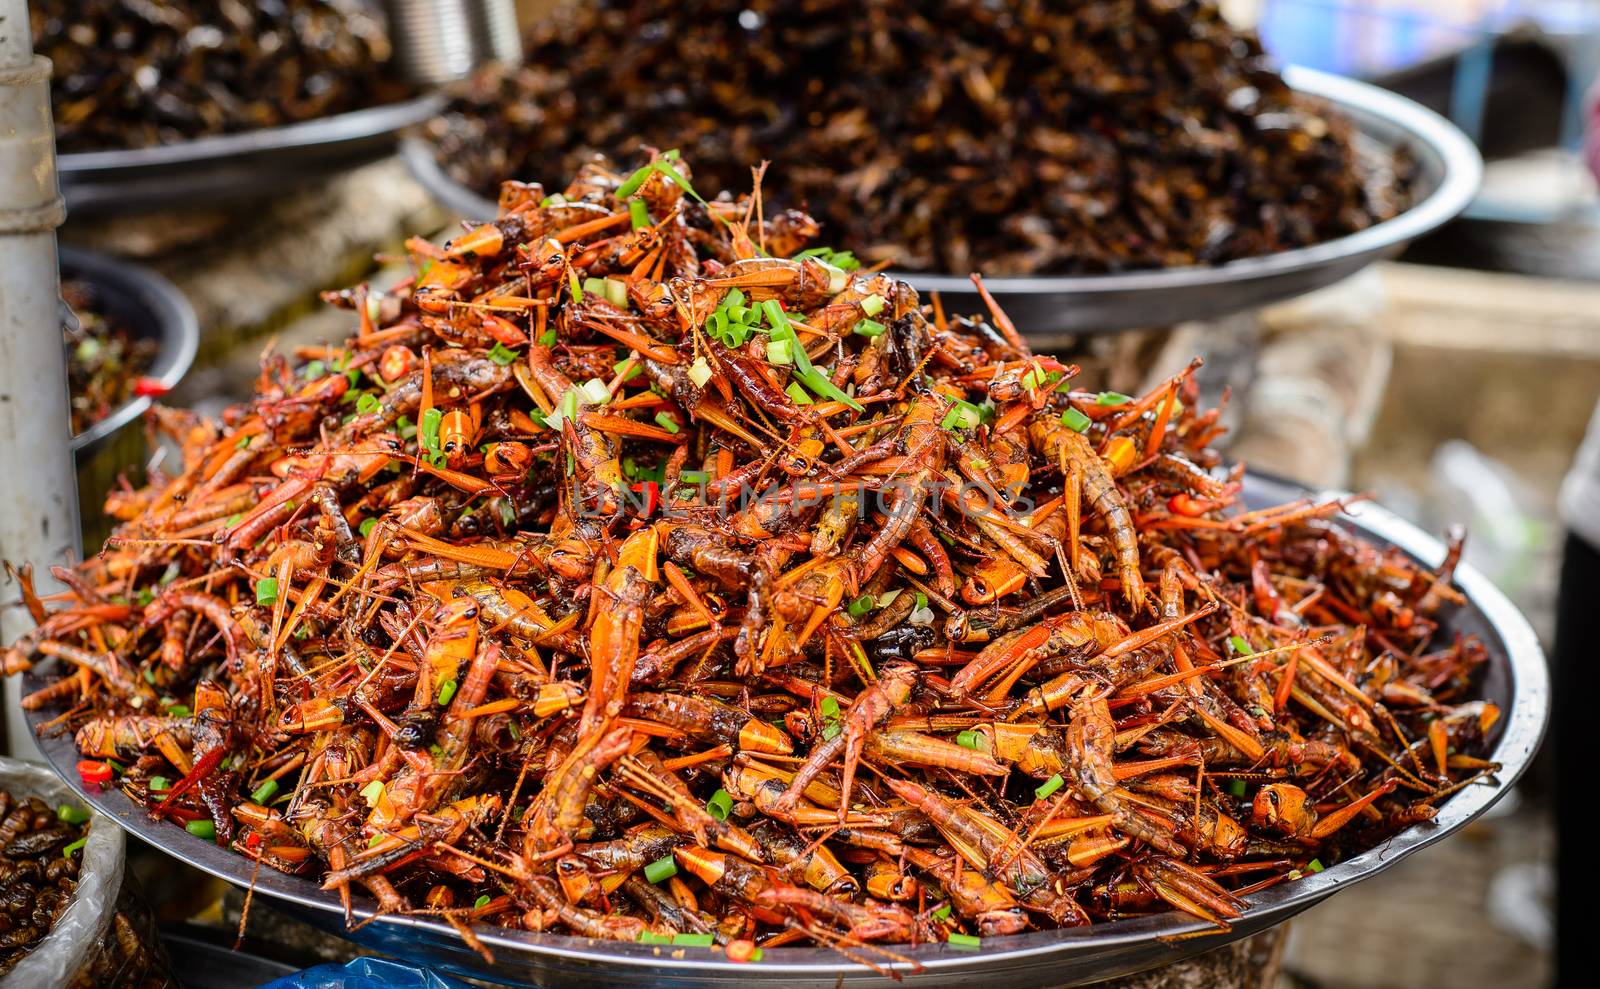 Fried Locusts & Fried Grasshoppers - a kind of insects food which were sold at Kampong Thom market, Cambodia in September 2014